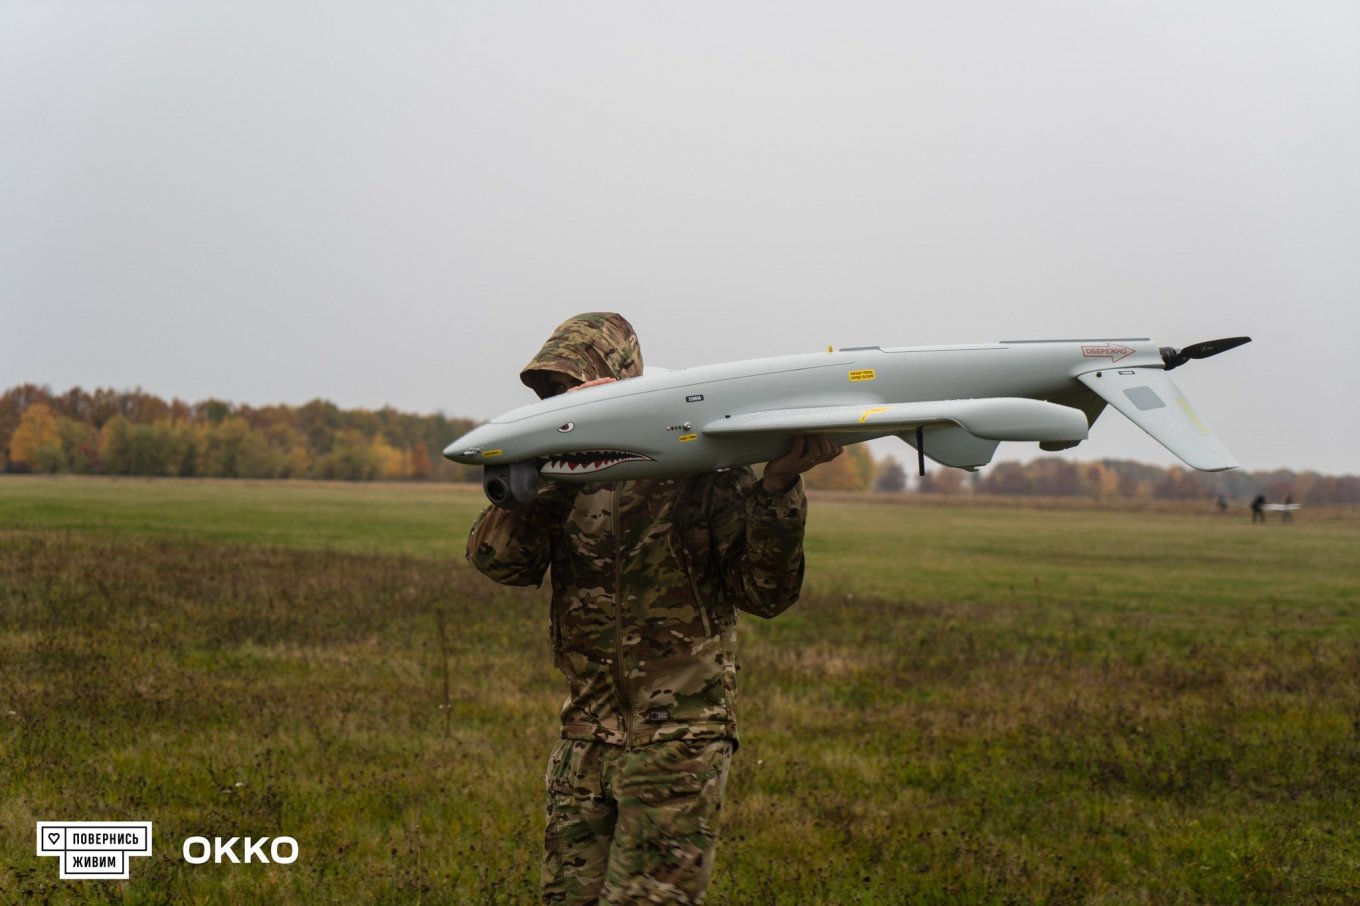 The Shark UAV by Ukrspecsystems, Shark UAVs Purchased by Ukrainian Volunteers Helped Destroy russia’s Equipment Worth Hundreds of Millions Dollars, Defense Express